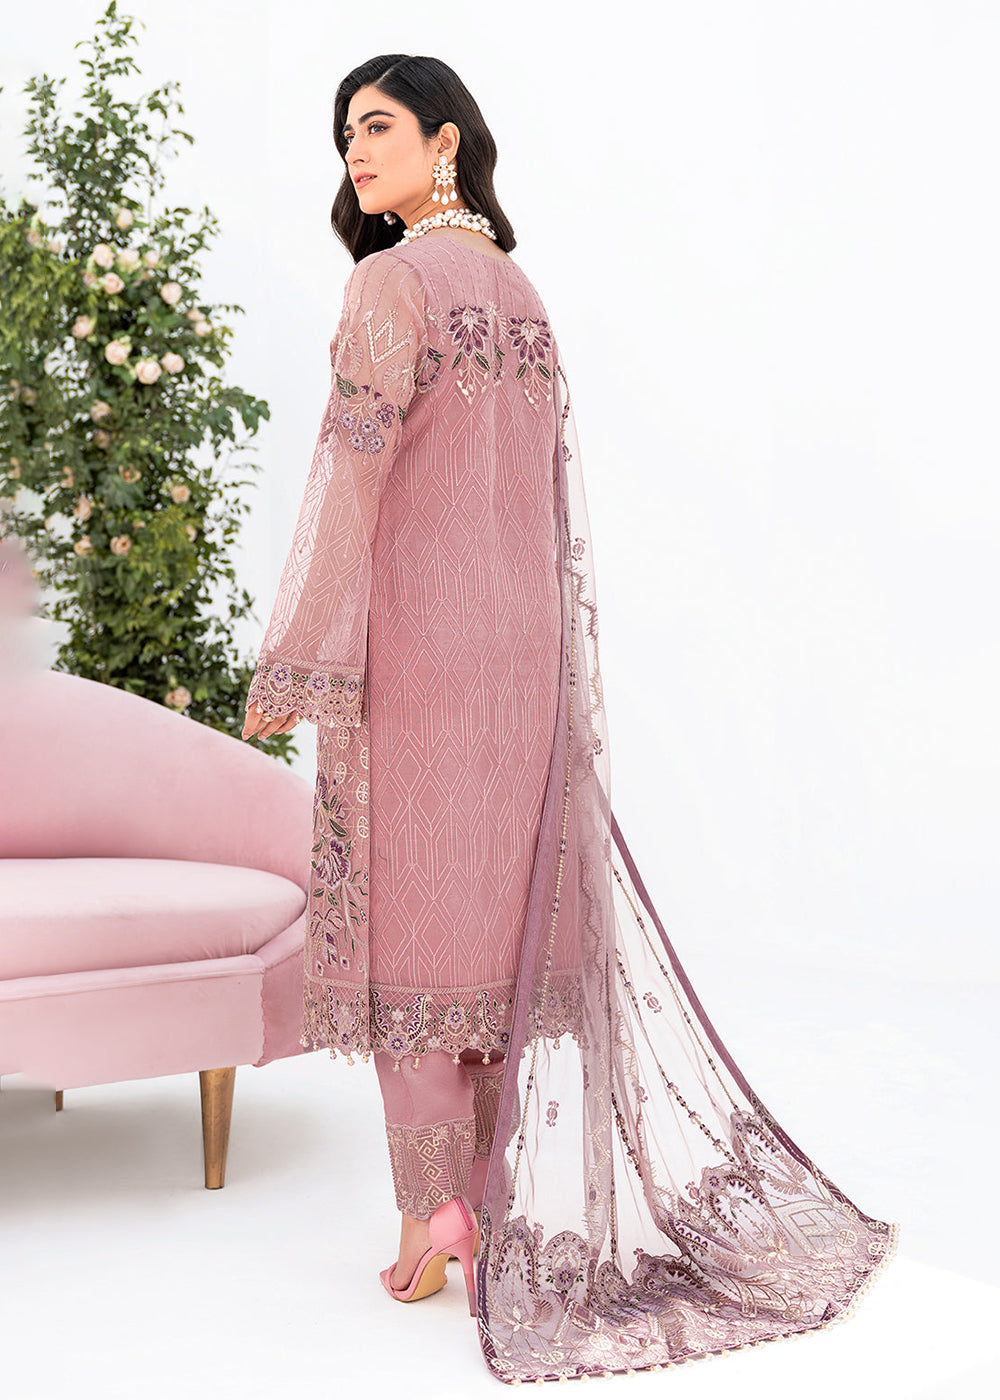 Buy Now Pink Organza Suit - Ramsha Minhal Collection Vol 8 - #M-804 Online in USA, UK, Canada & Worldwide at Empress Clothing.